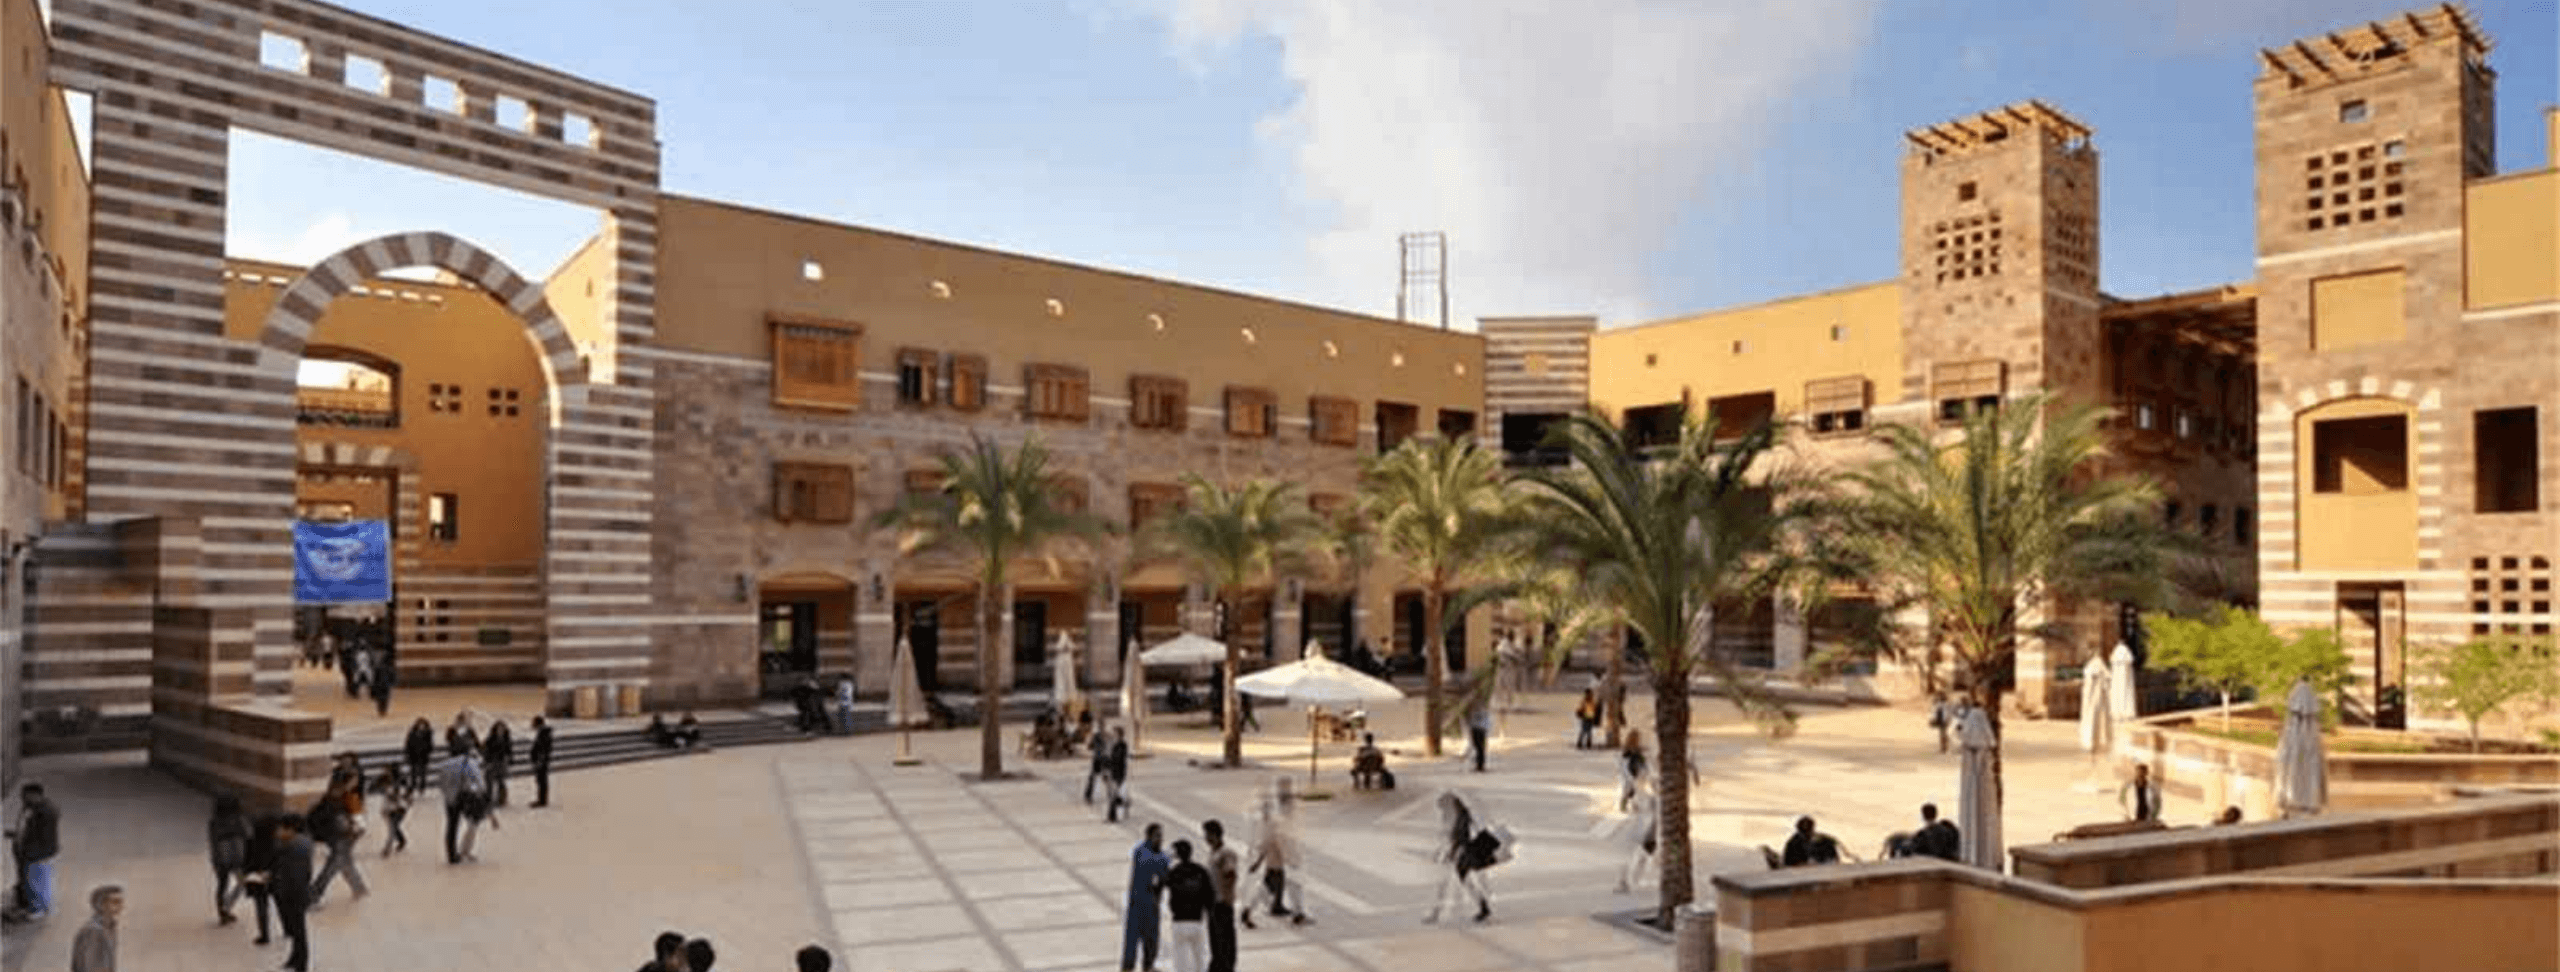 Free English Courses  The American University in Cairo